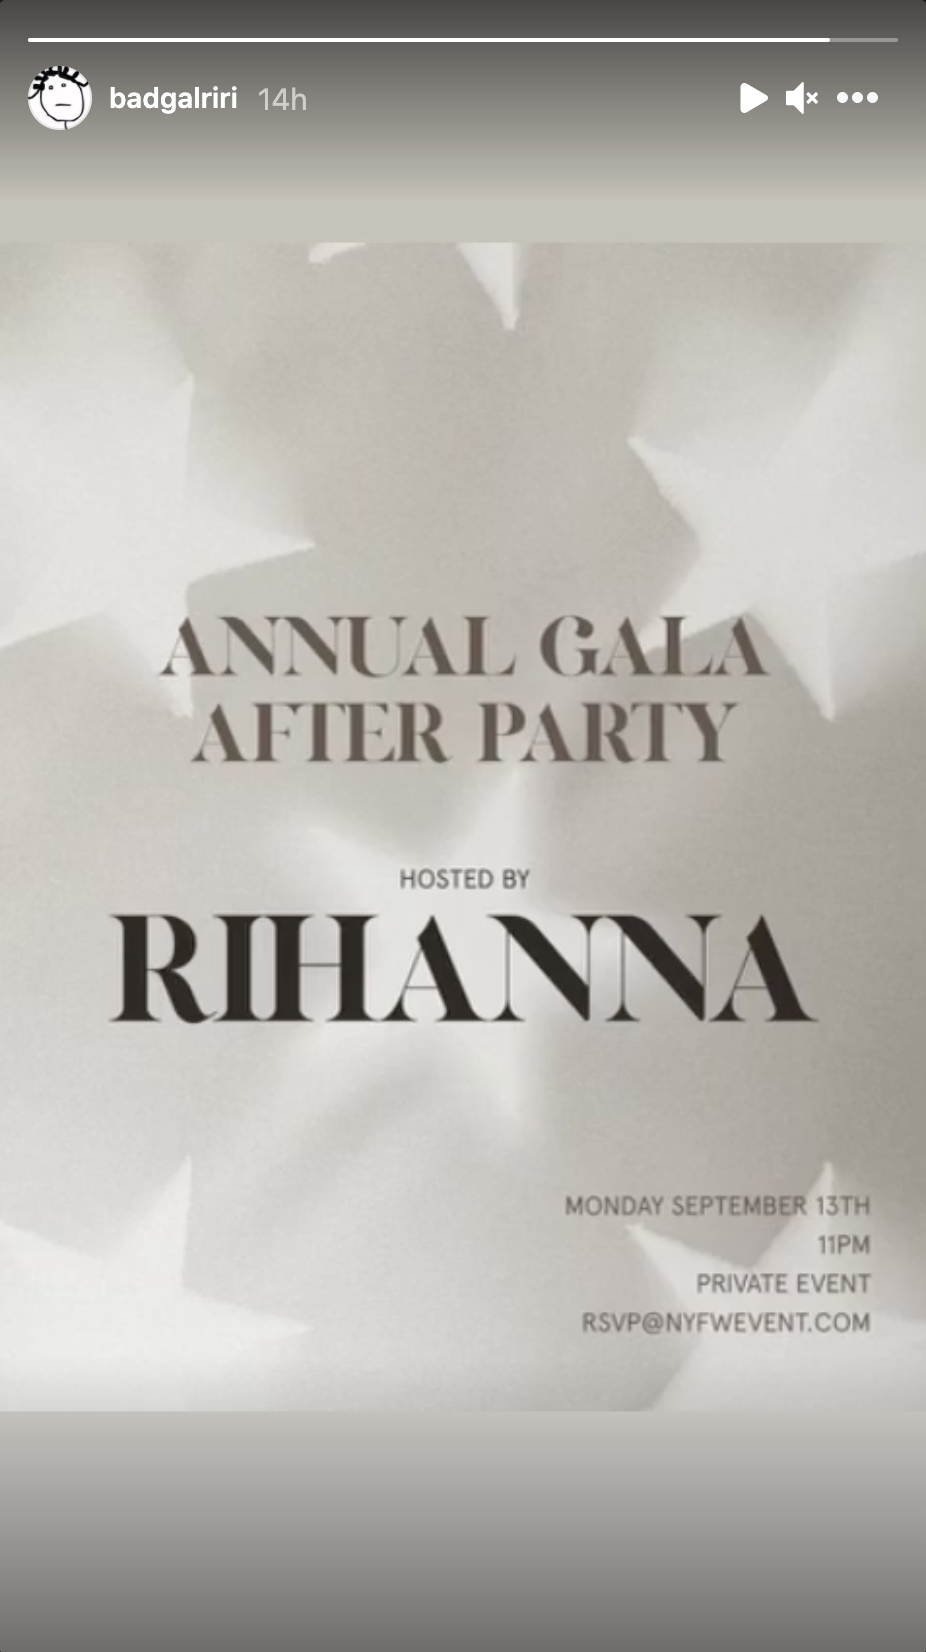 rihanna official met ball afterparty